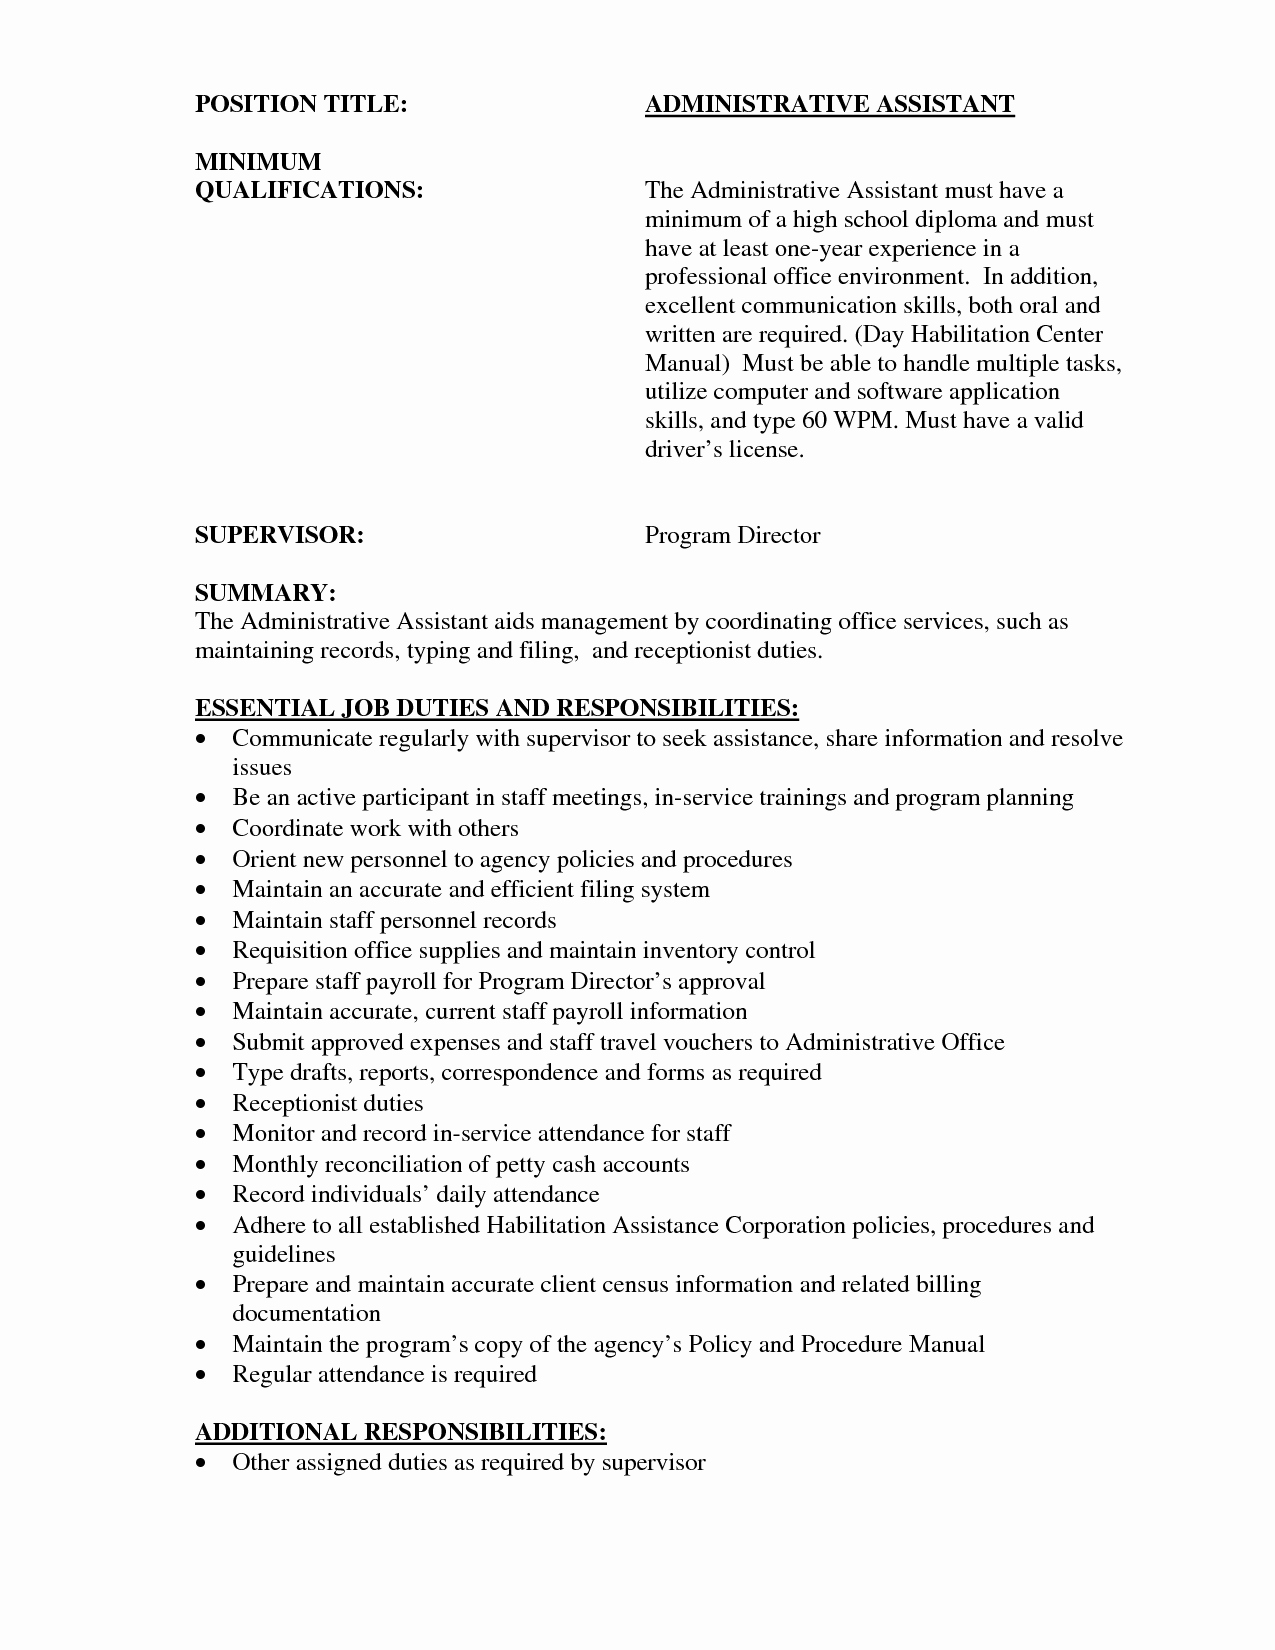 Administrative Assistant Qualifications Resume